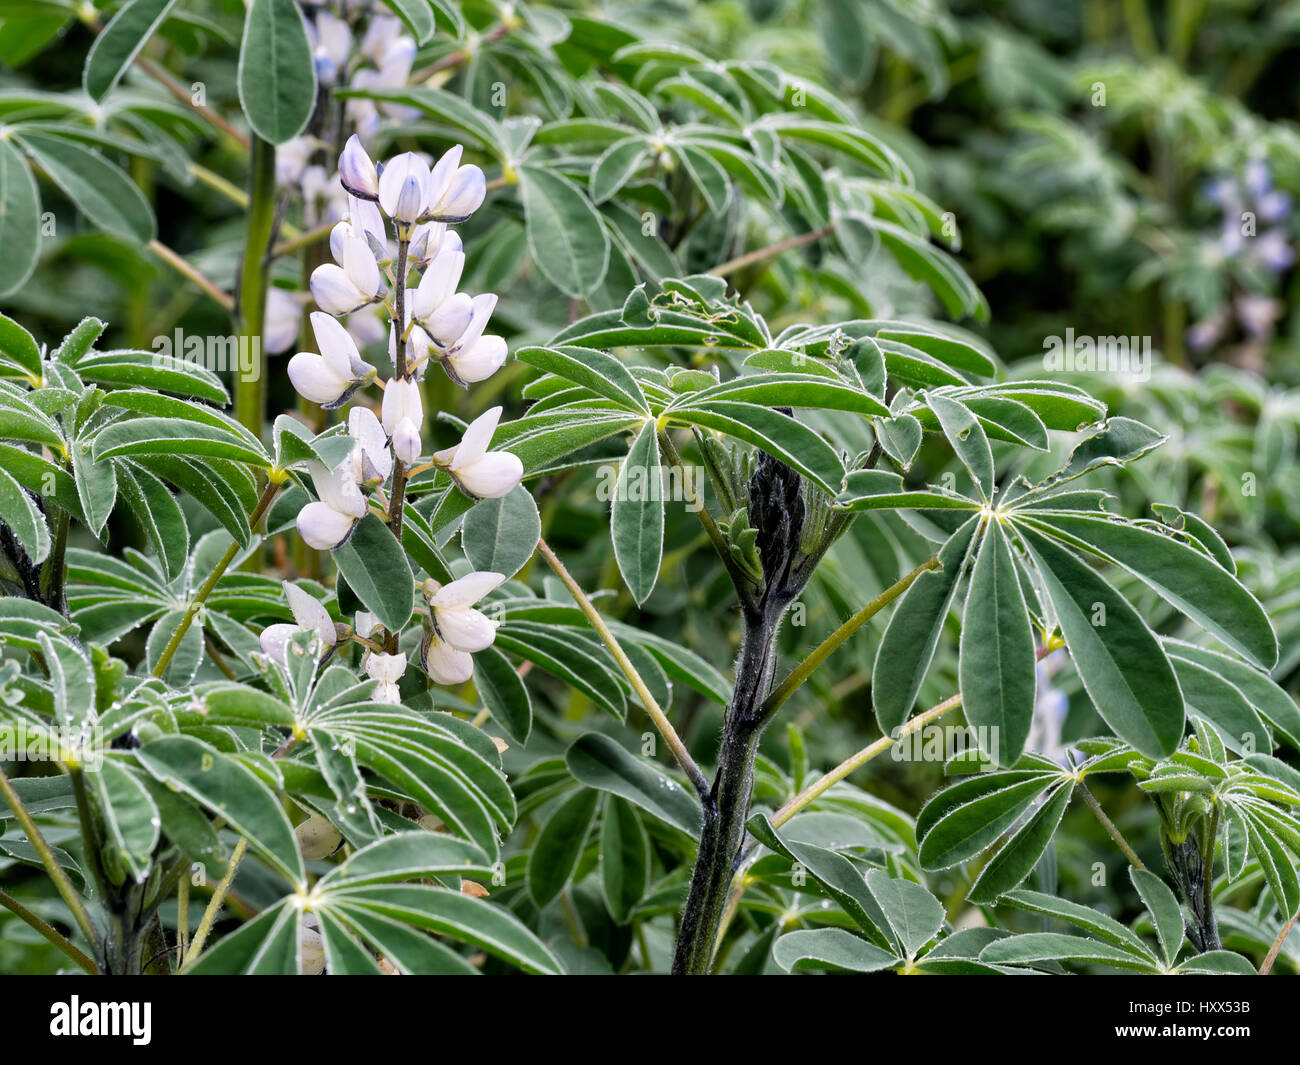 Lupin plant. High protein and high fibre niche crop. Close up detail. Stock Photo